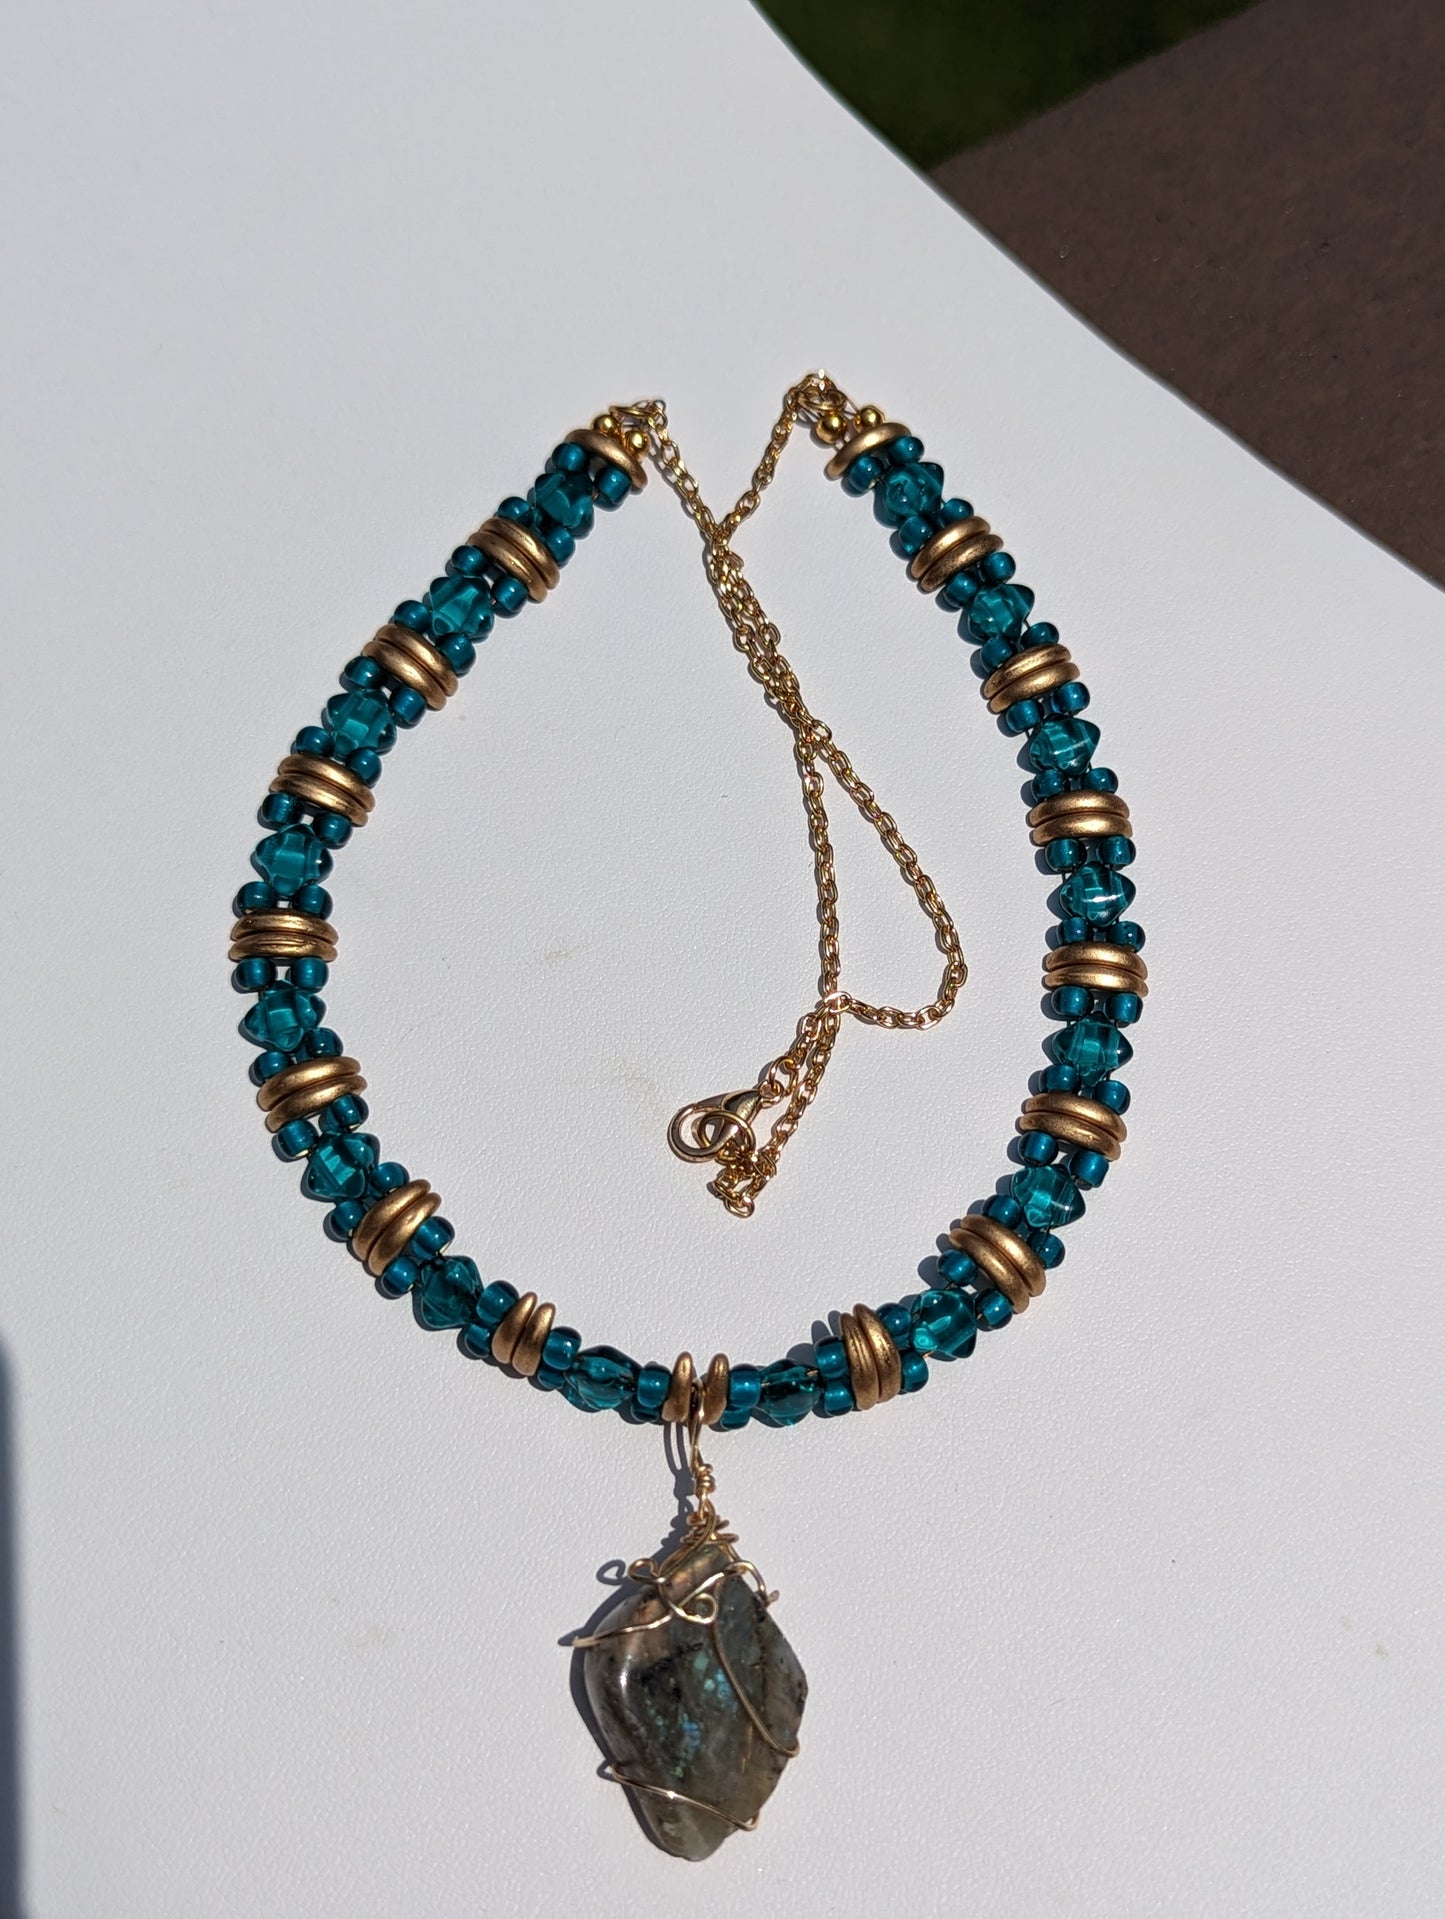 Wire-wrapped Labradorite Pendant on Beaded Necklace